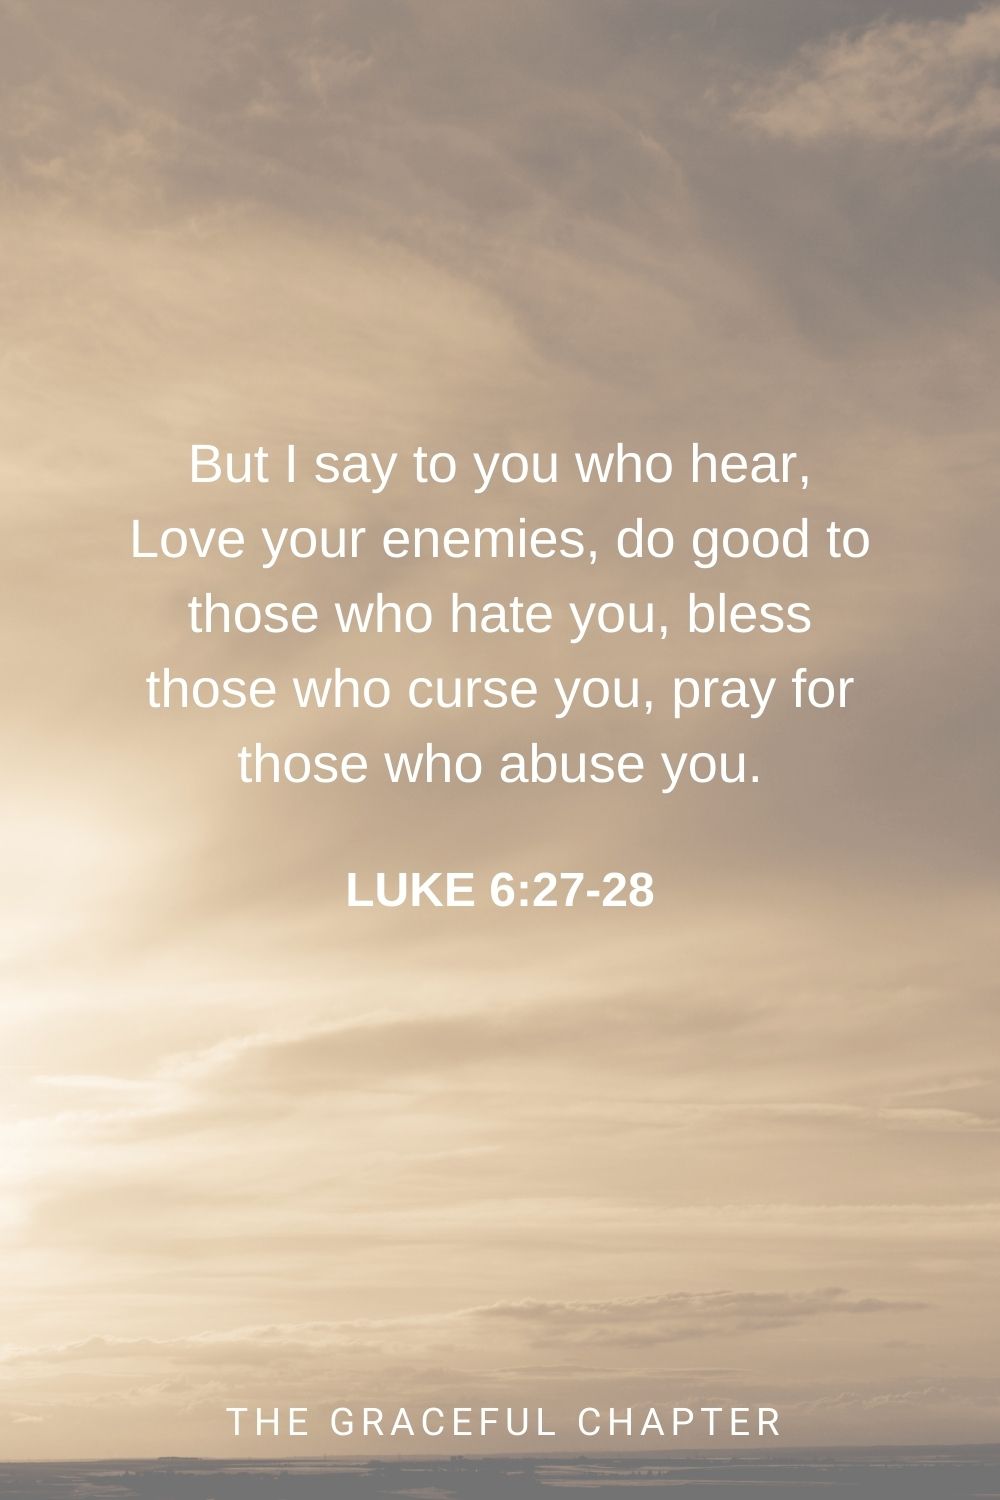 But I say to you who hear, Love your enemies, do good to those who hate you, bless those who curse you, pray for those who abuse you. Luke 6:27-28